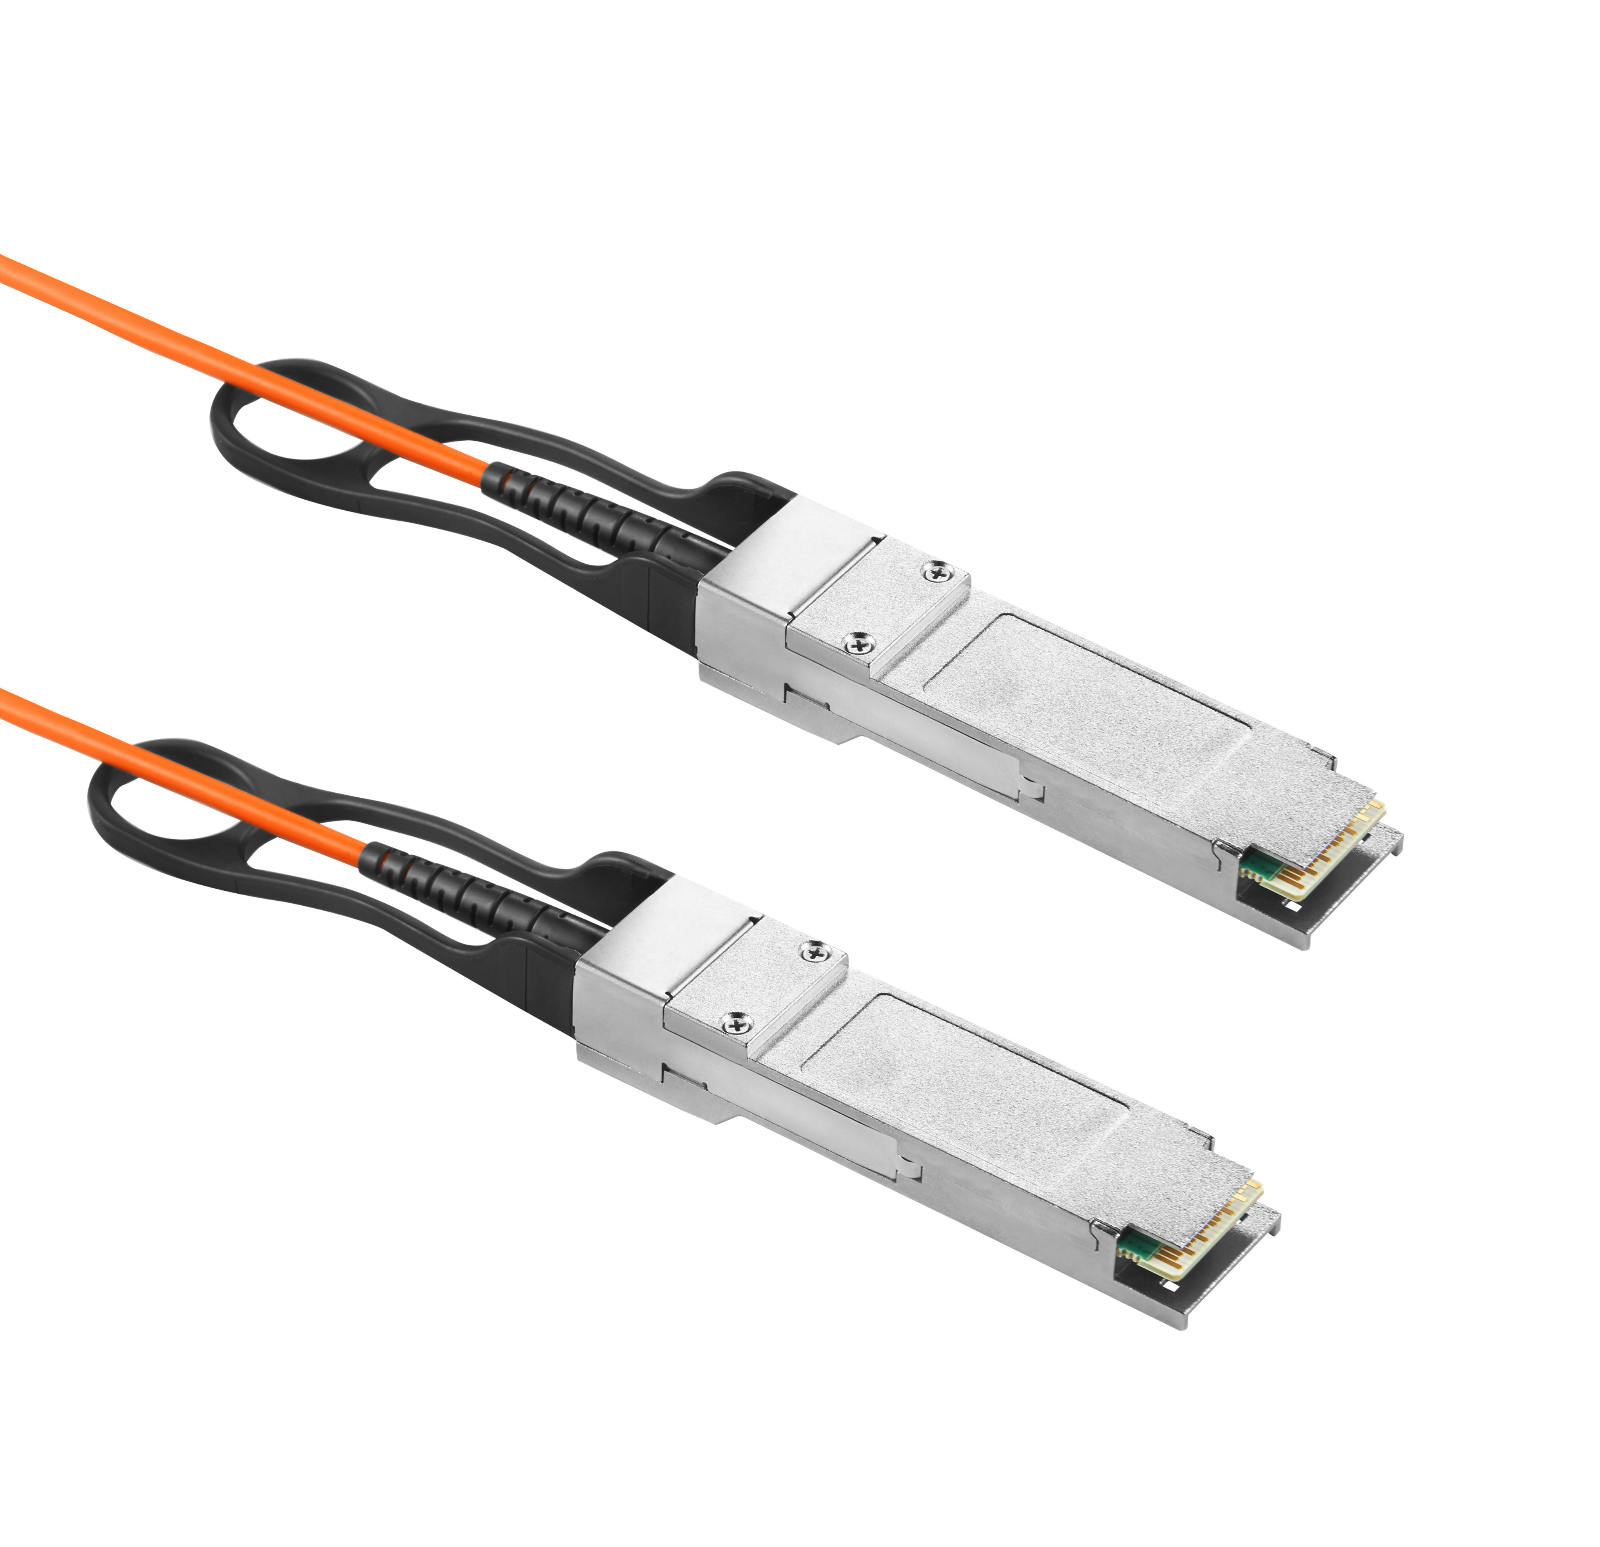 CableQSFP28 to 4xSFP28 AOC Cables the correct operation